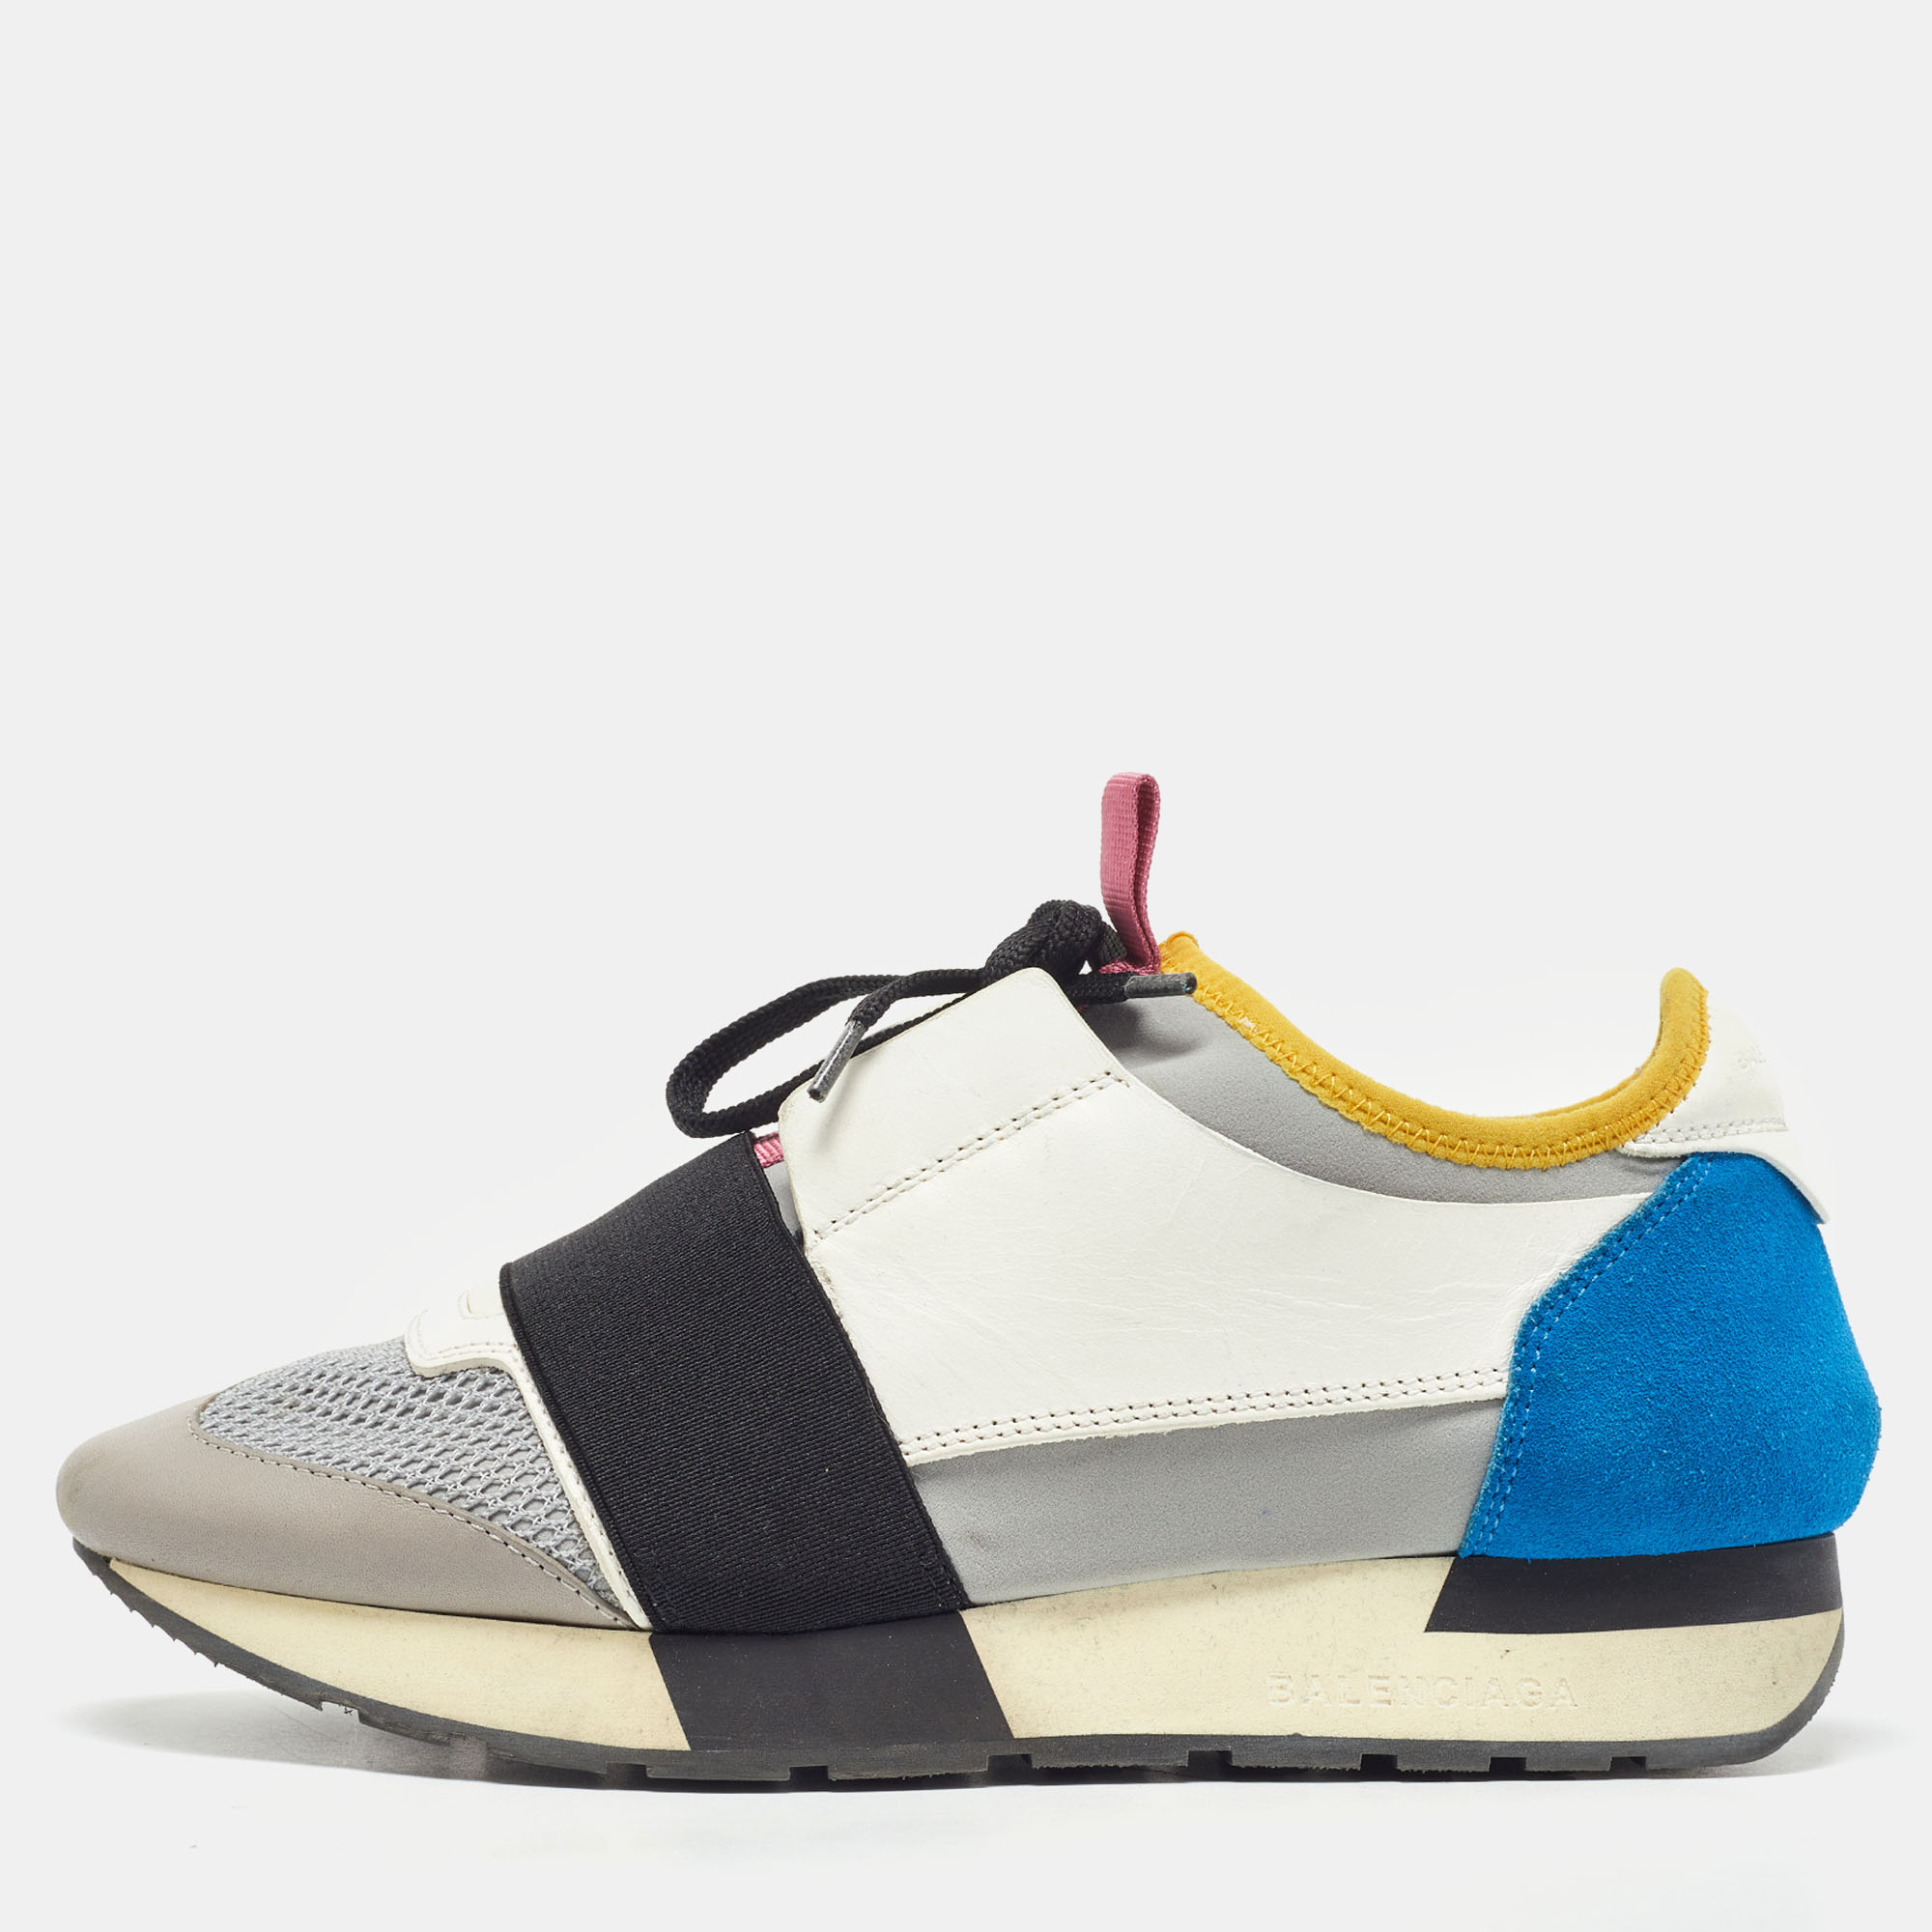 The Balenciaga Race Runner sneakers have been crafted from quality materials and feature a chic silhouette. They flaunt covered toes strap detailing on the vamps and tie up fastenings. They are complete with a leather lined insole and a tough base to provide maximum comfort when walking. The sneakers are perfect for a fun day out with friends.